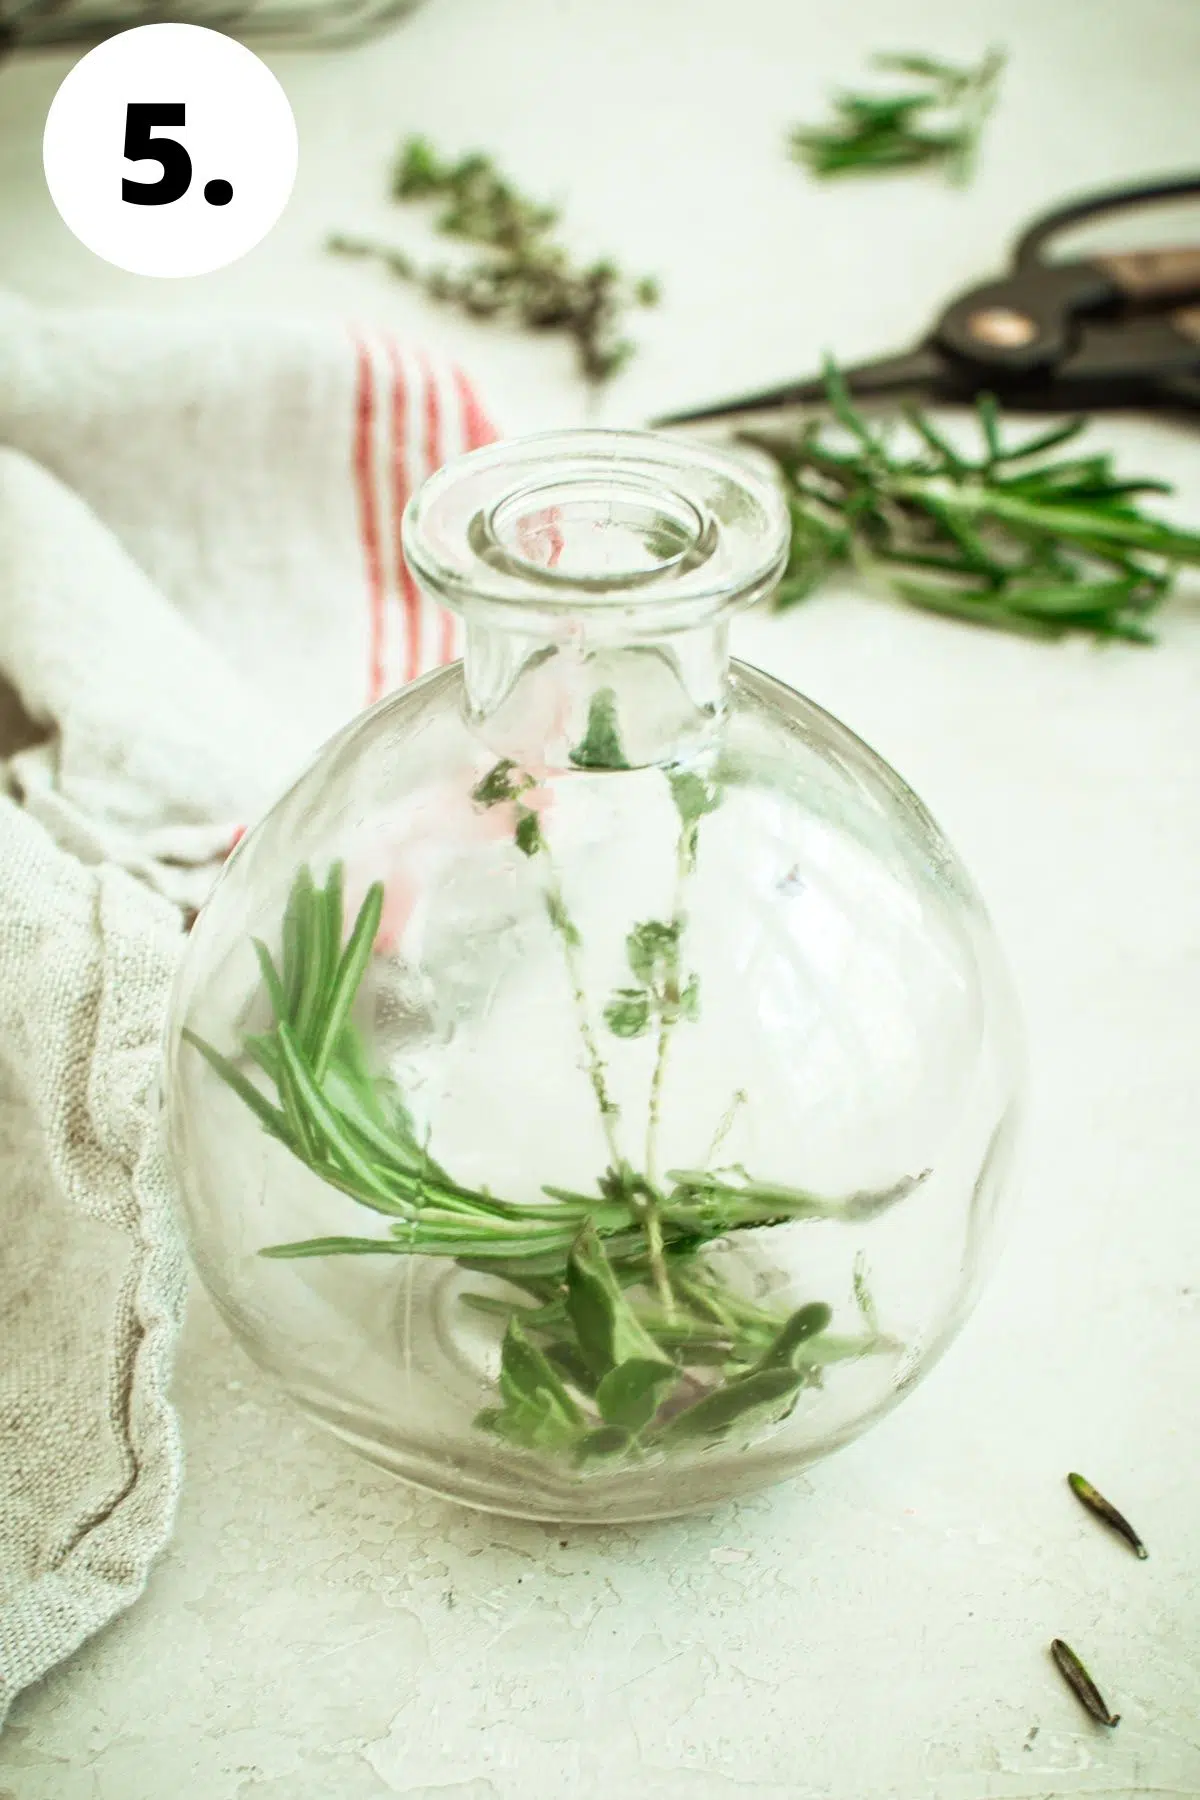 Round glass bottle with herbs inside.